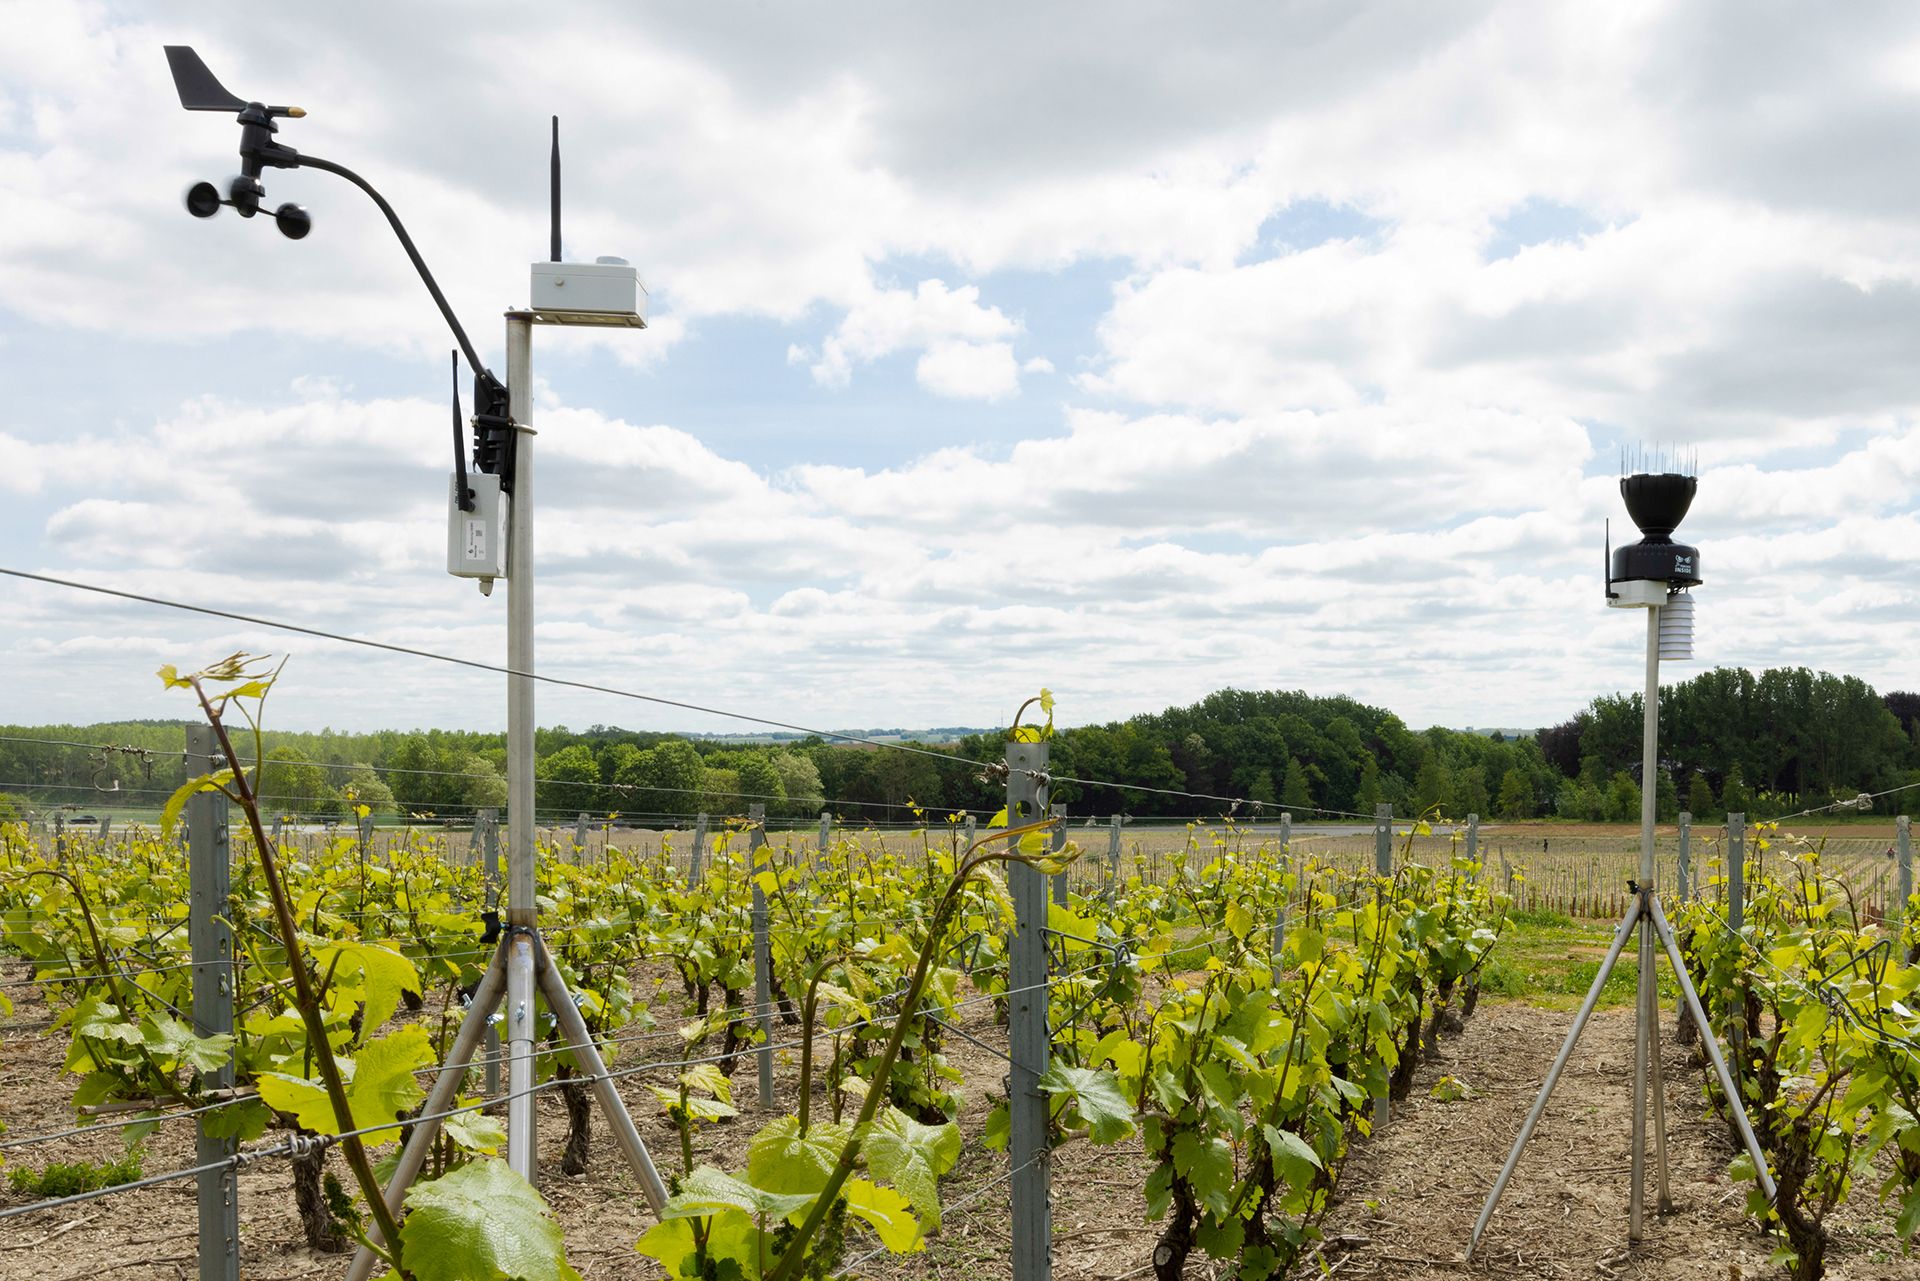 Where to place your connected weather station?